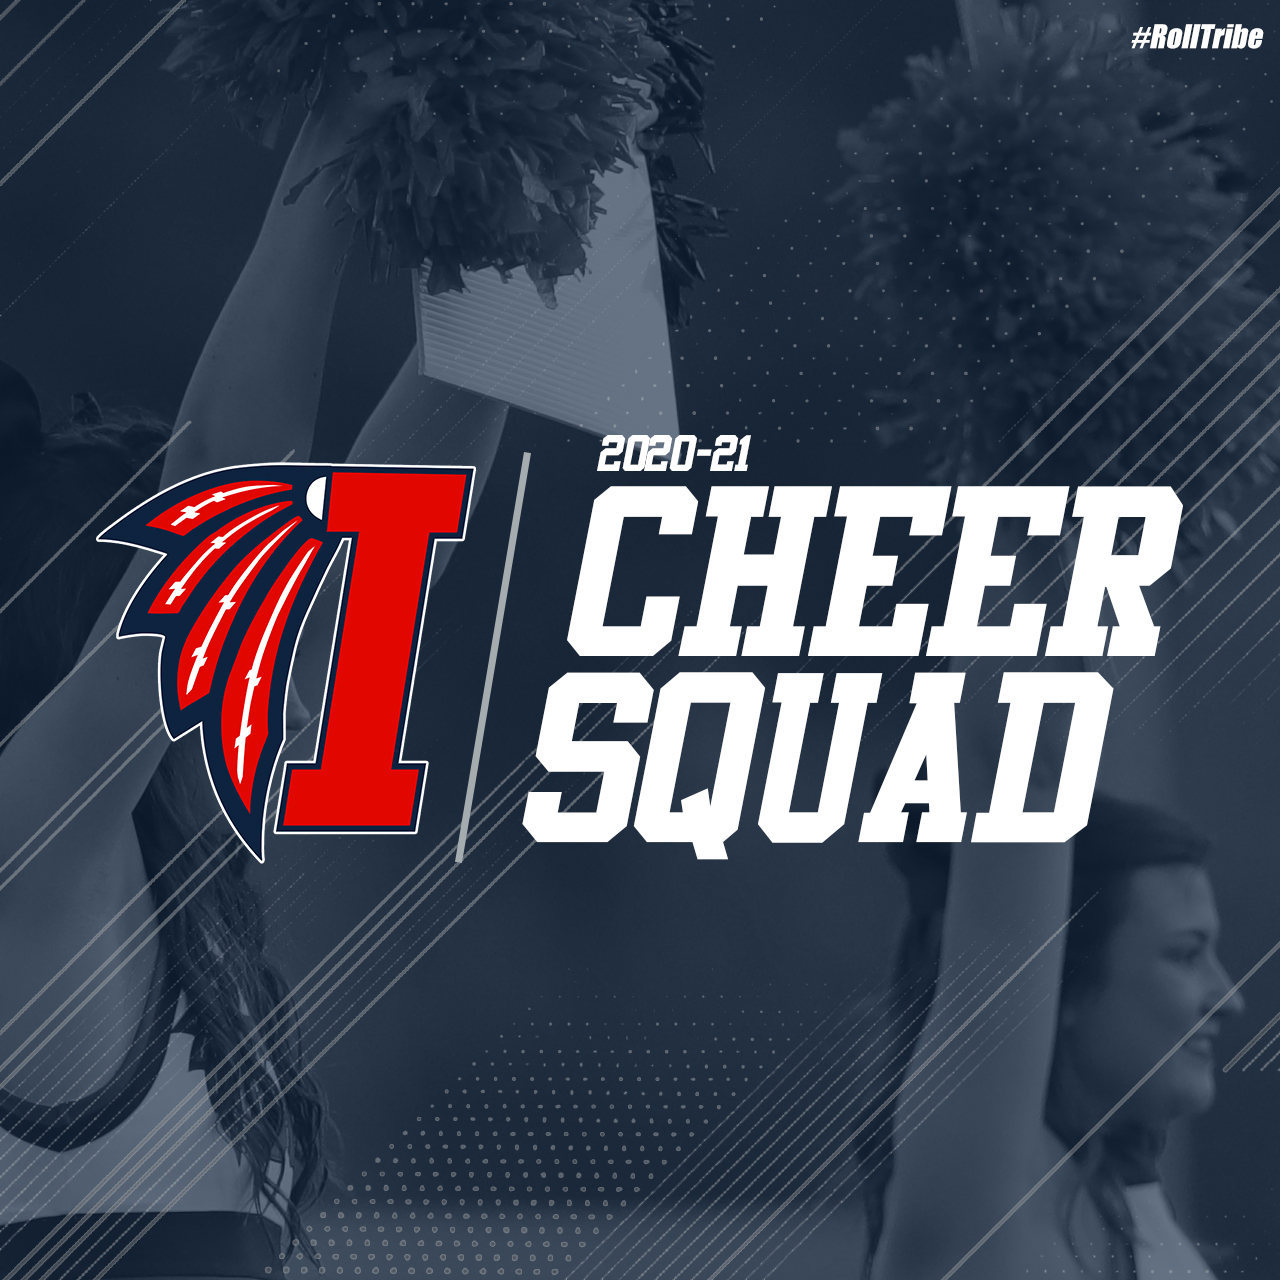 ICC selects 2020-21 cheer squad.